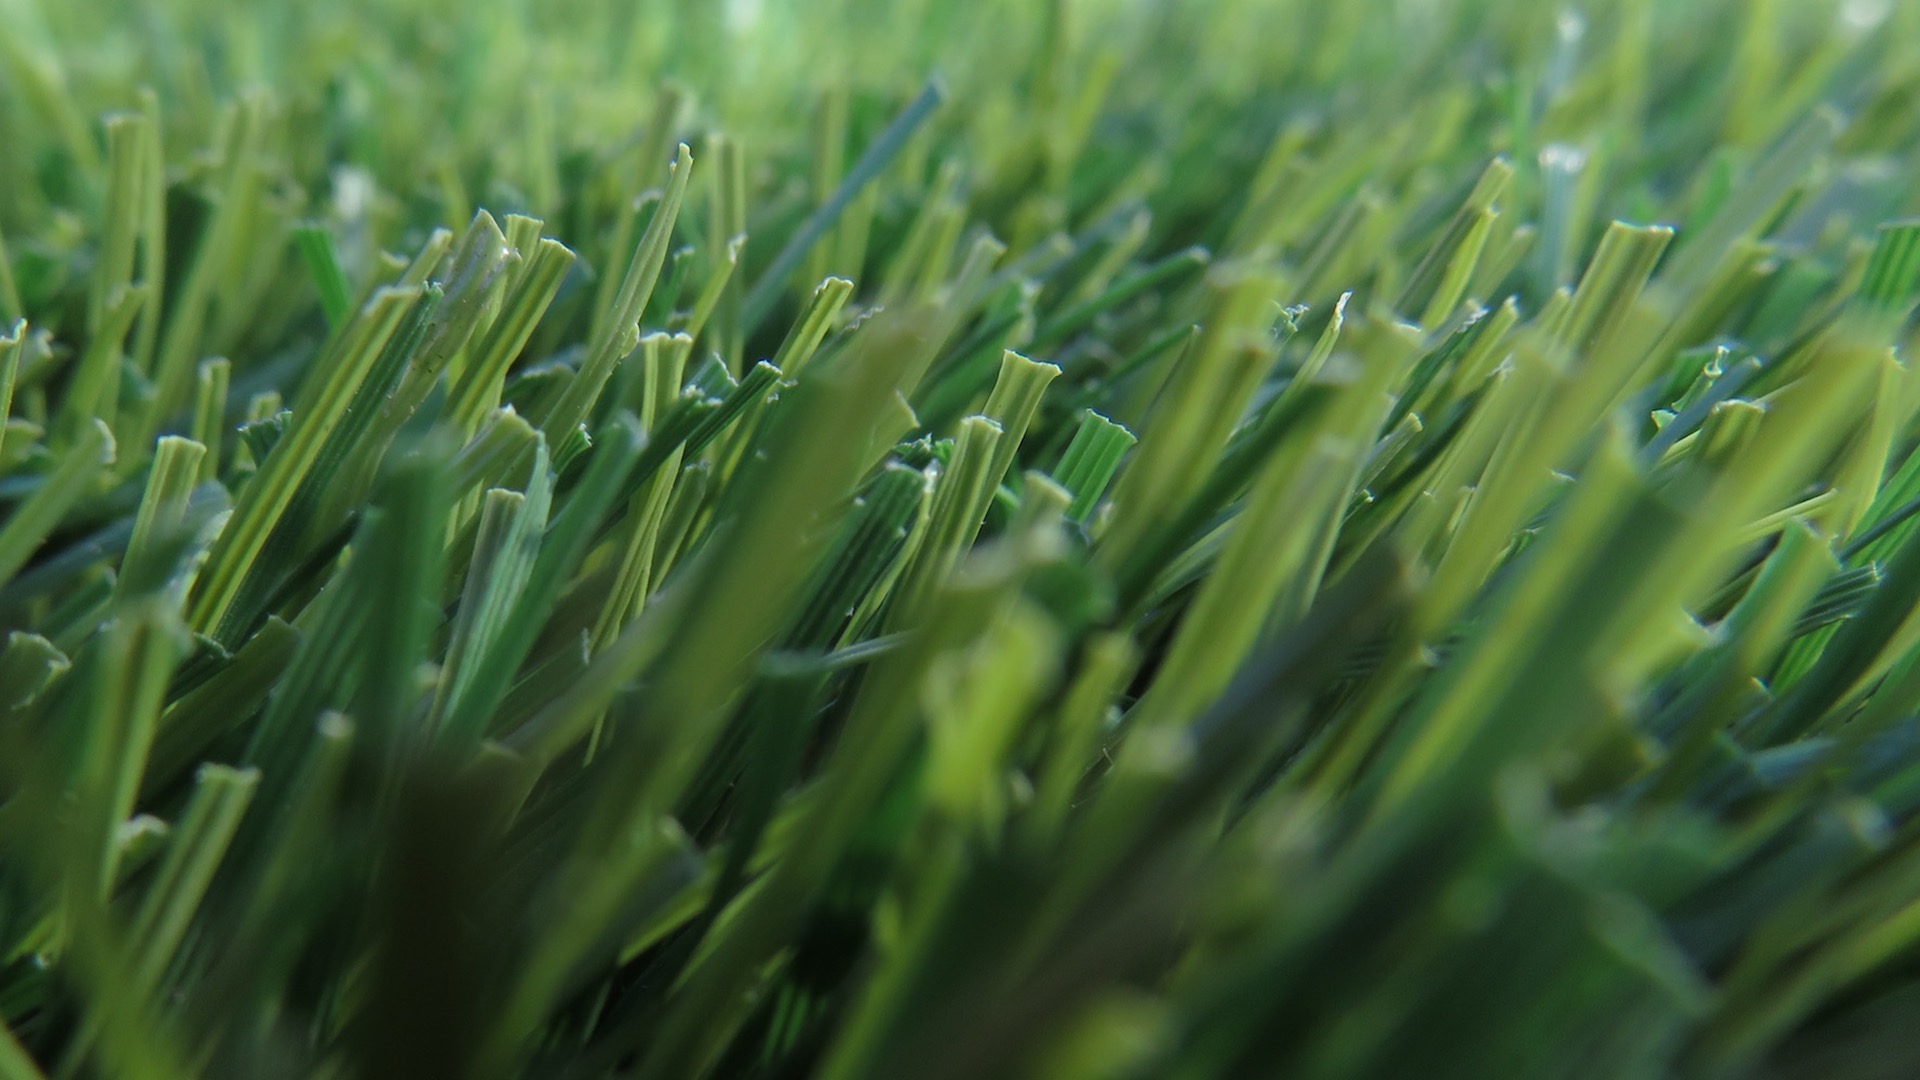 Picking Artificial Grass That’s Right For You